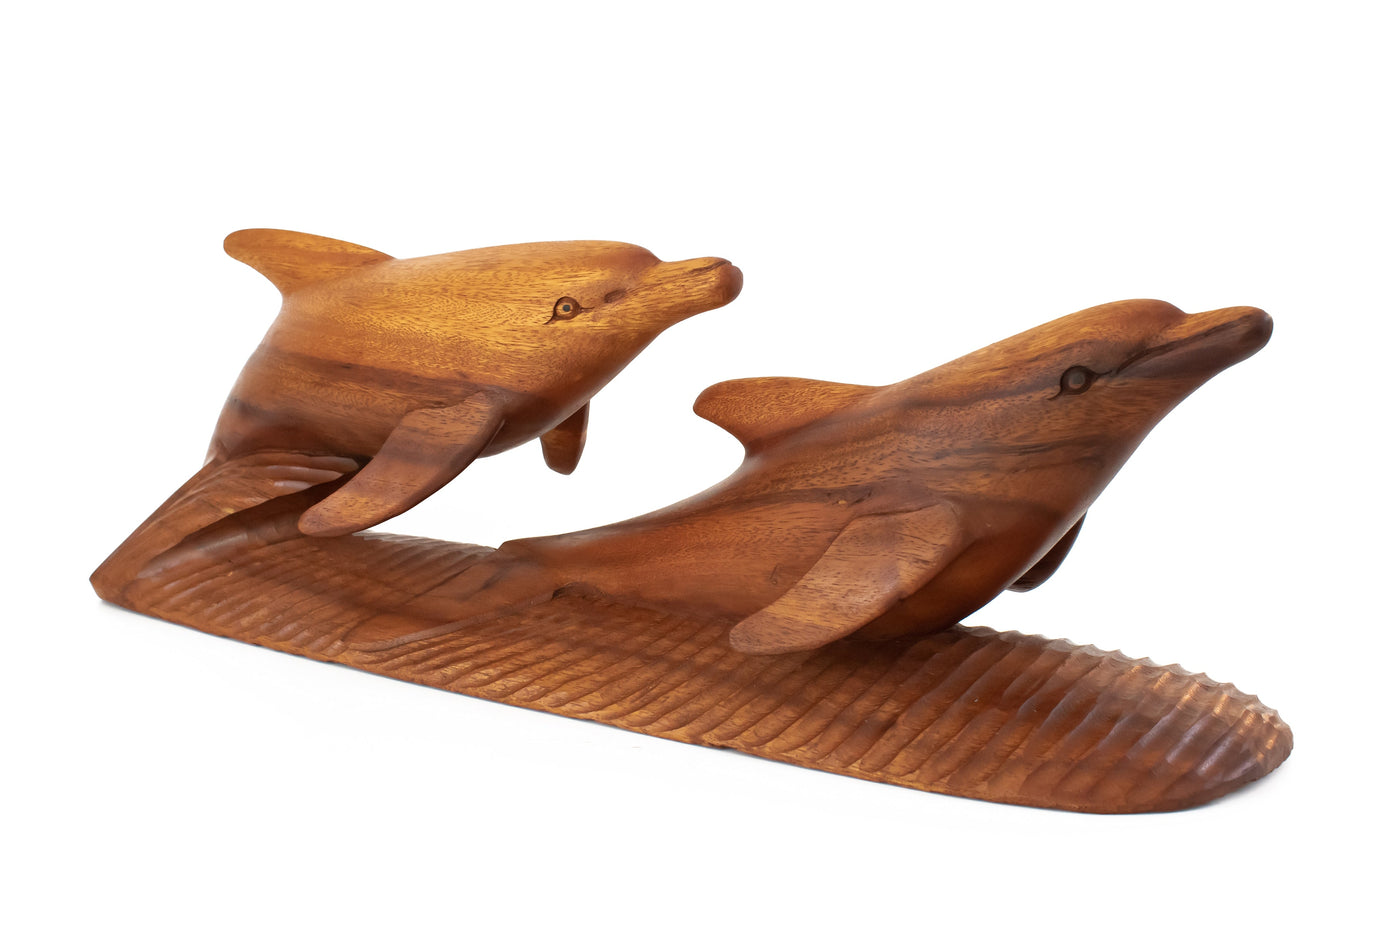 20" Large Wooden Hand Carved 2 Dolphins Statue Sculpture Wood Decor Accent Fish Figurine Handcrafted Handmade Seaside Tropical Nautical Ocean Coastal